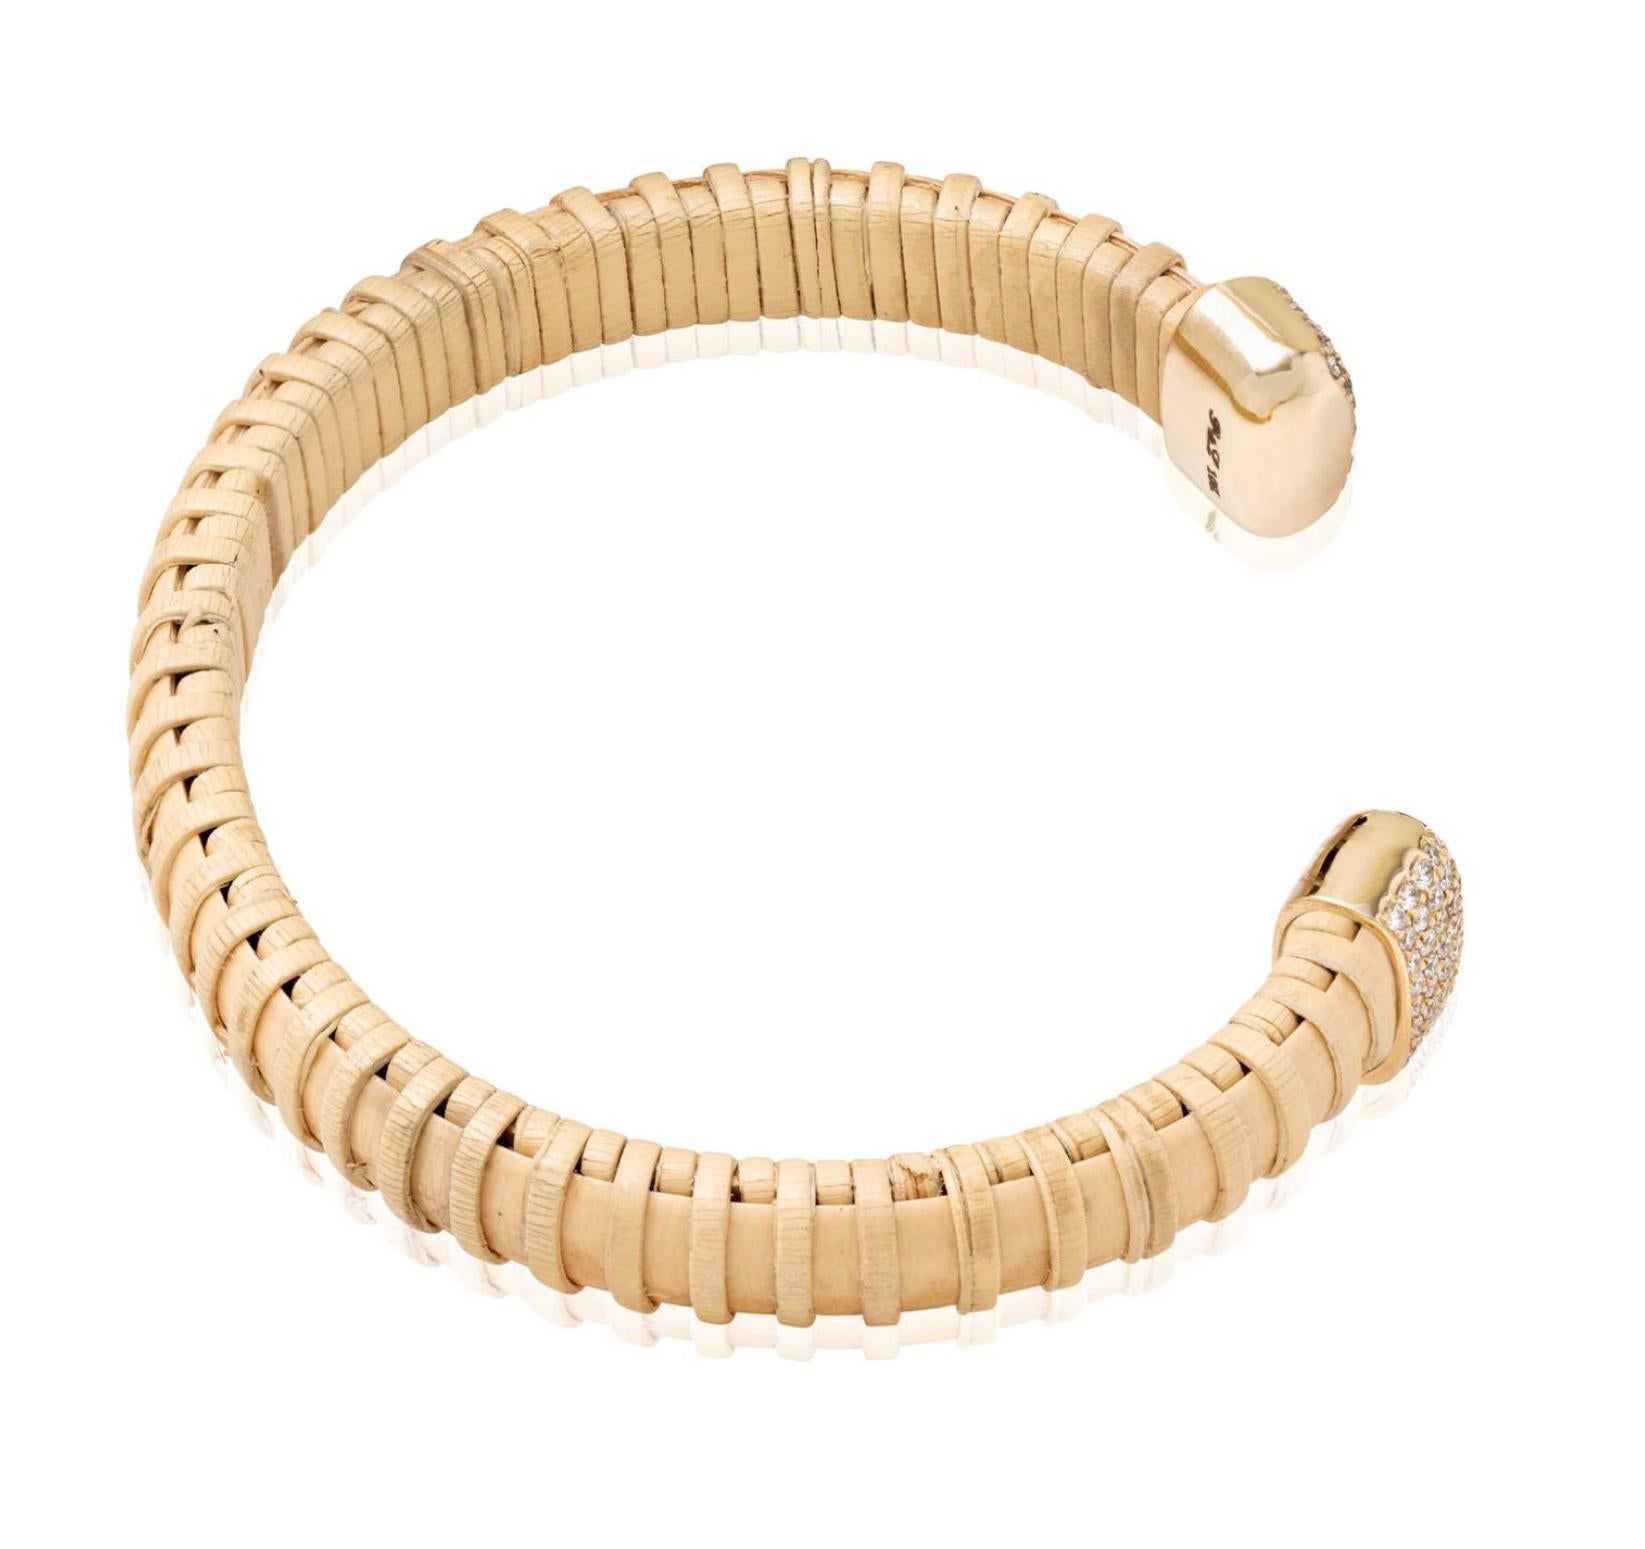 Nantucket Basket Lightship jewelry is a tradition in New England. This handmade cuff celebrates the tradition with a modern esthetic by adding gold and diamonds. Thin natural cain & rattan cuff with 10K yellow gold caps, and 1.2mm SI1 - SI2 diamonds